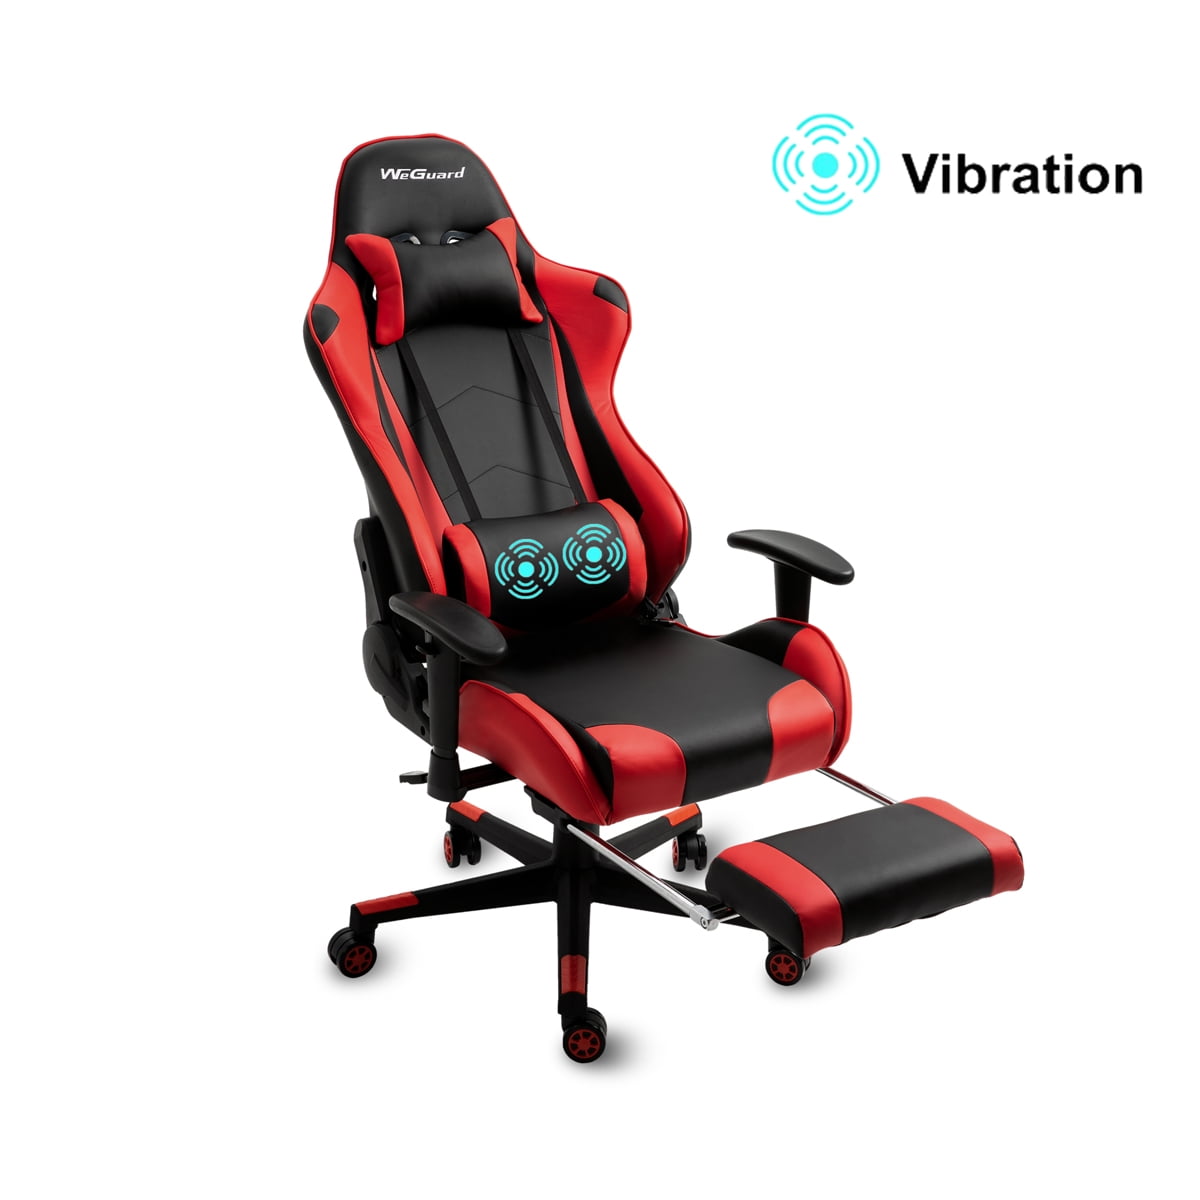 Ergonomic Office Chair Computer Gaming Chair Massage Reclining w/ Footrest 